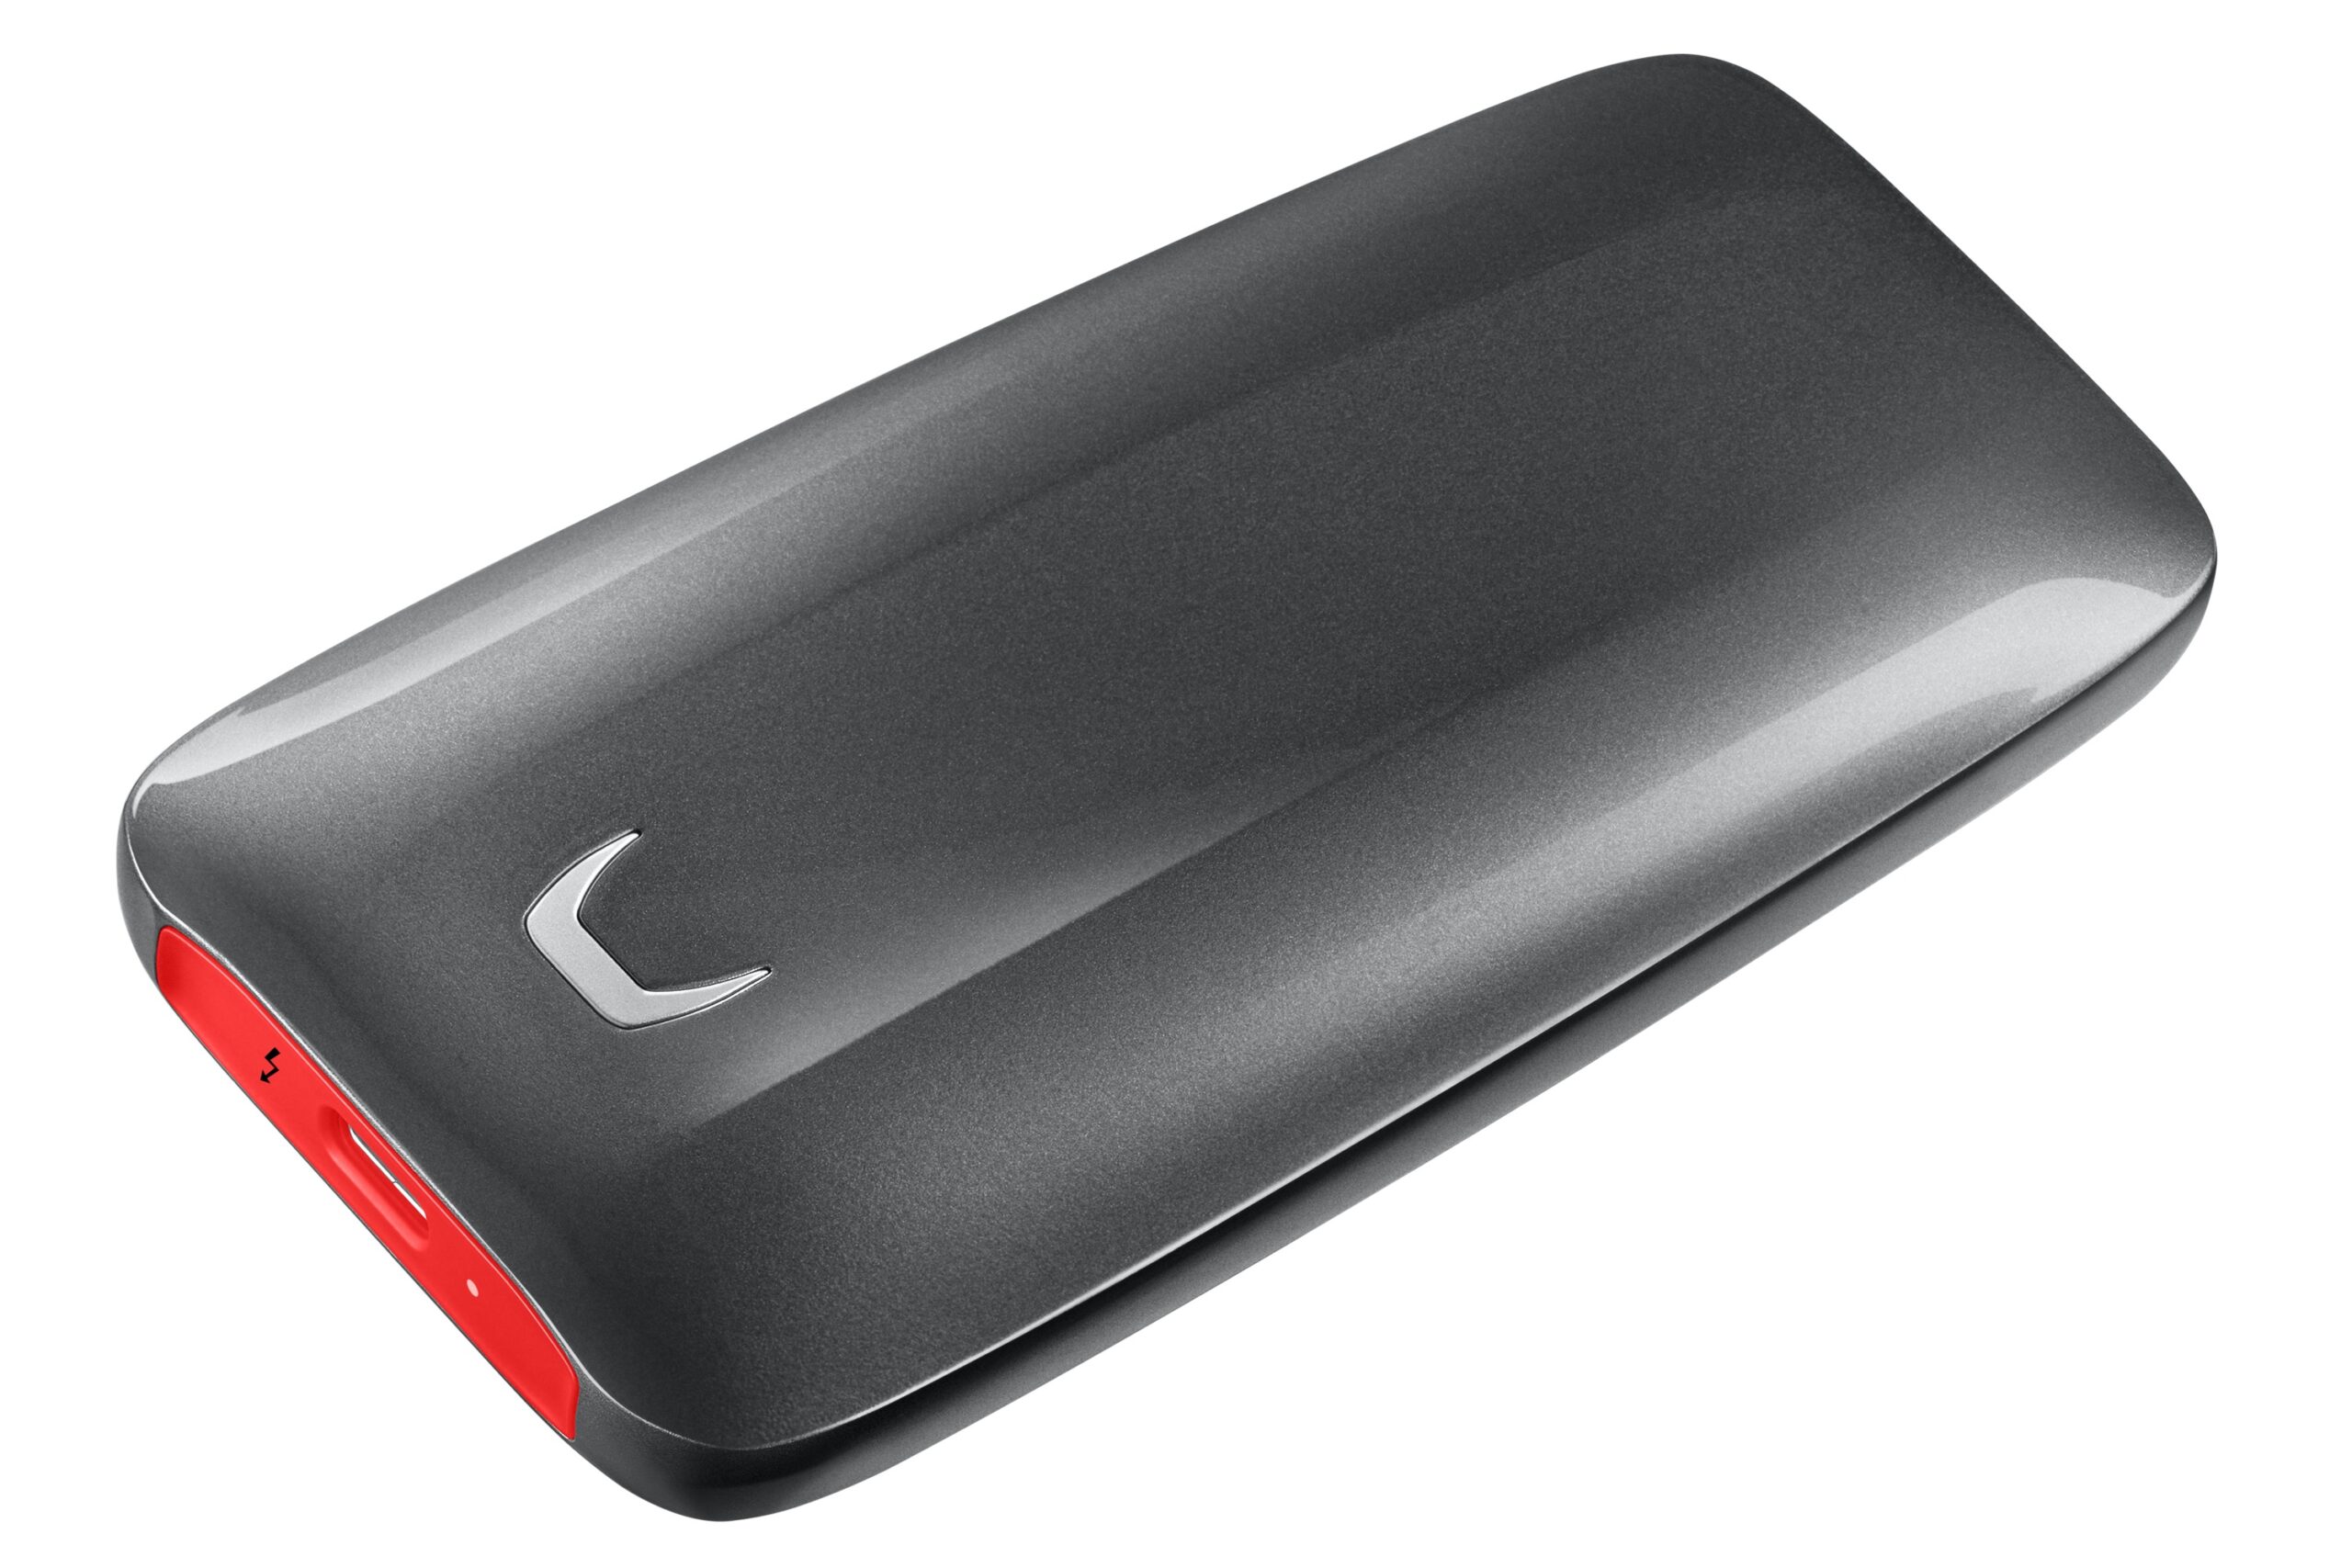 Samsung X5, external SSD with Thunderbolt 3 connection